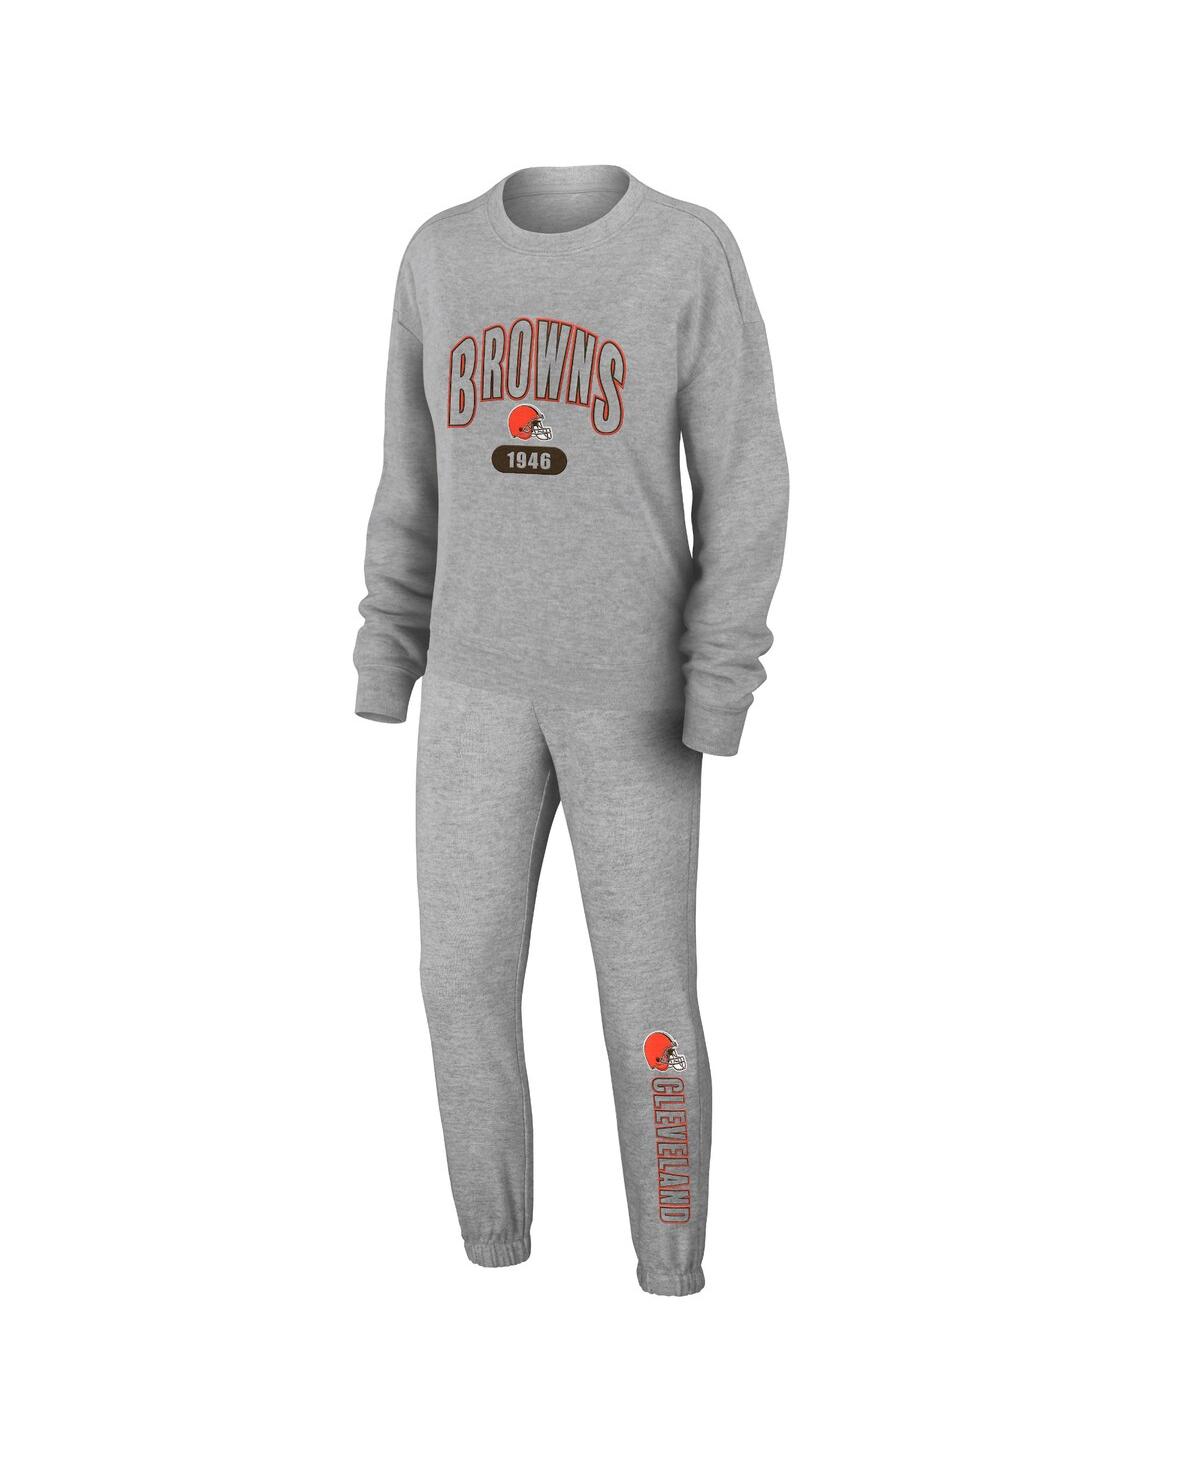 Women's Wear by Erin Andrews Heather Gray Cleveland Browns Knit Long Sleeve Tri-Blend T-shirt and Pants Sleep Set - Heather Gray